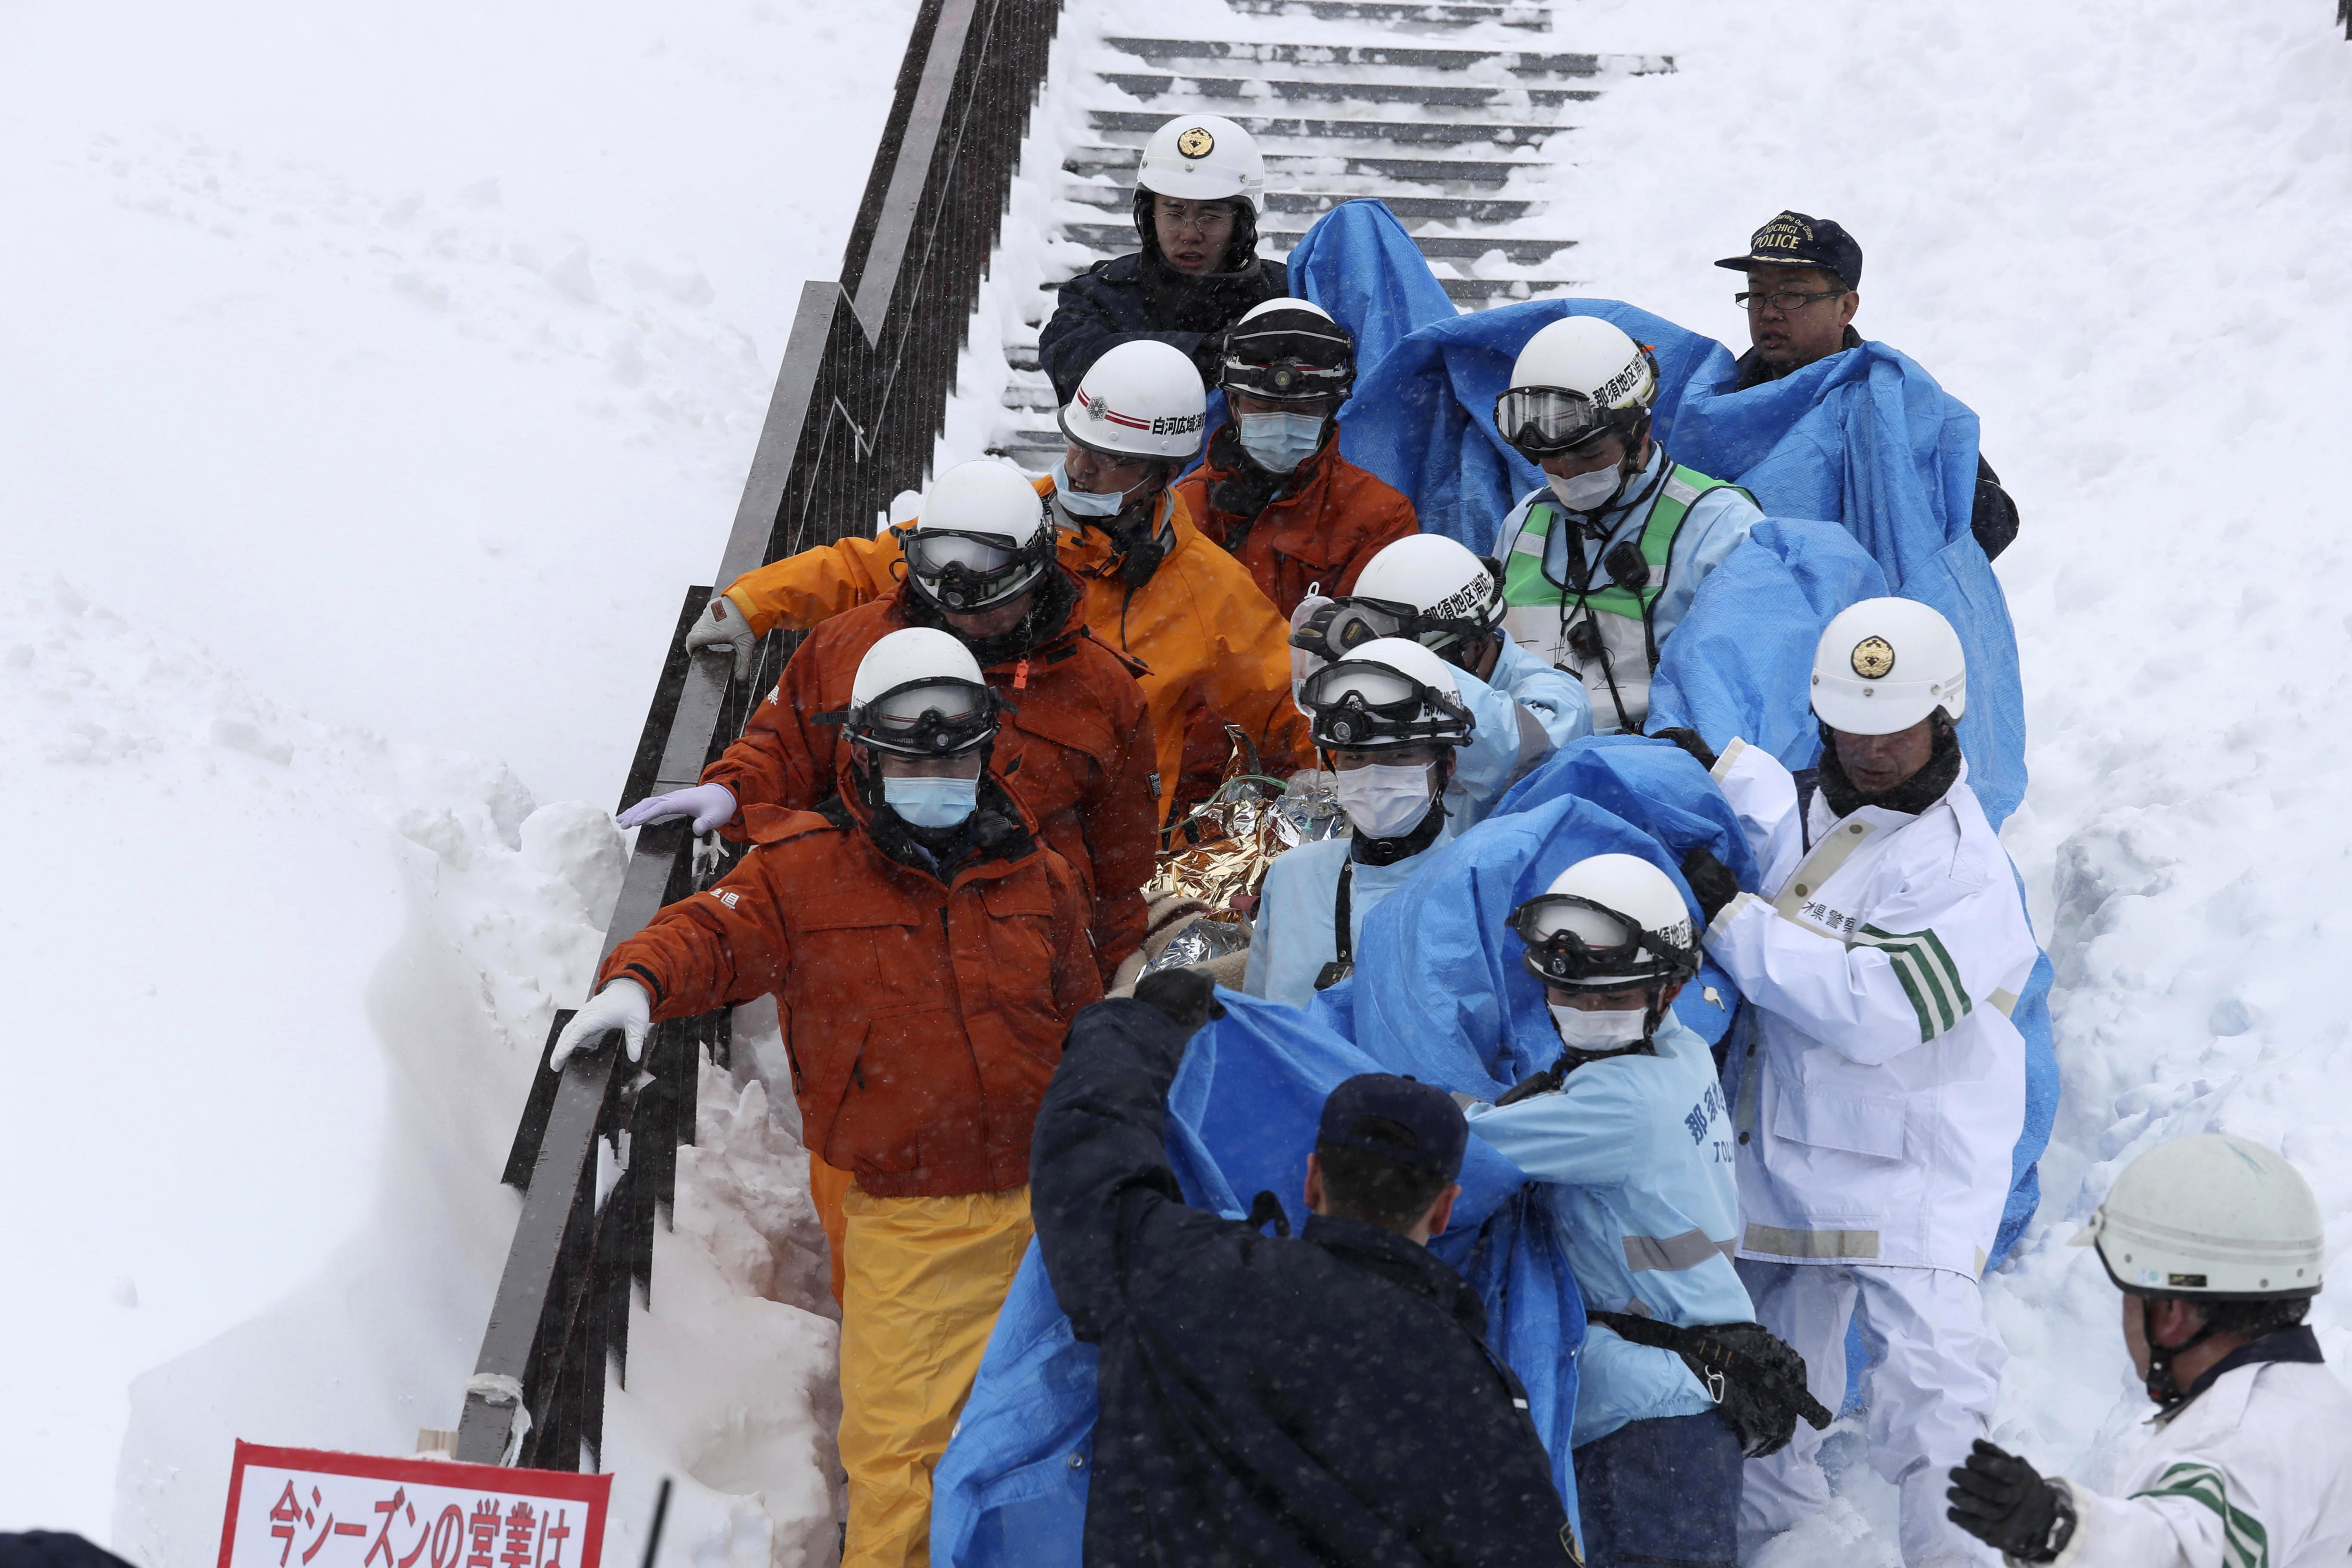 8 Teenagers Presumed Dead After Avalanche In Japan The Boston Globe